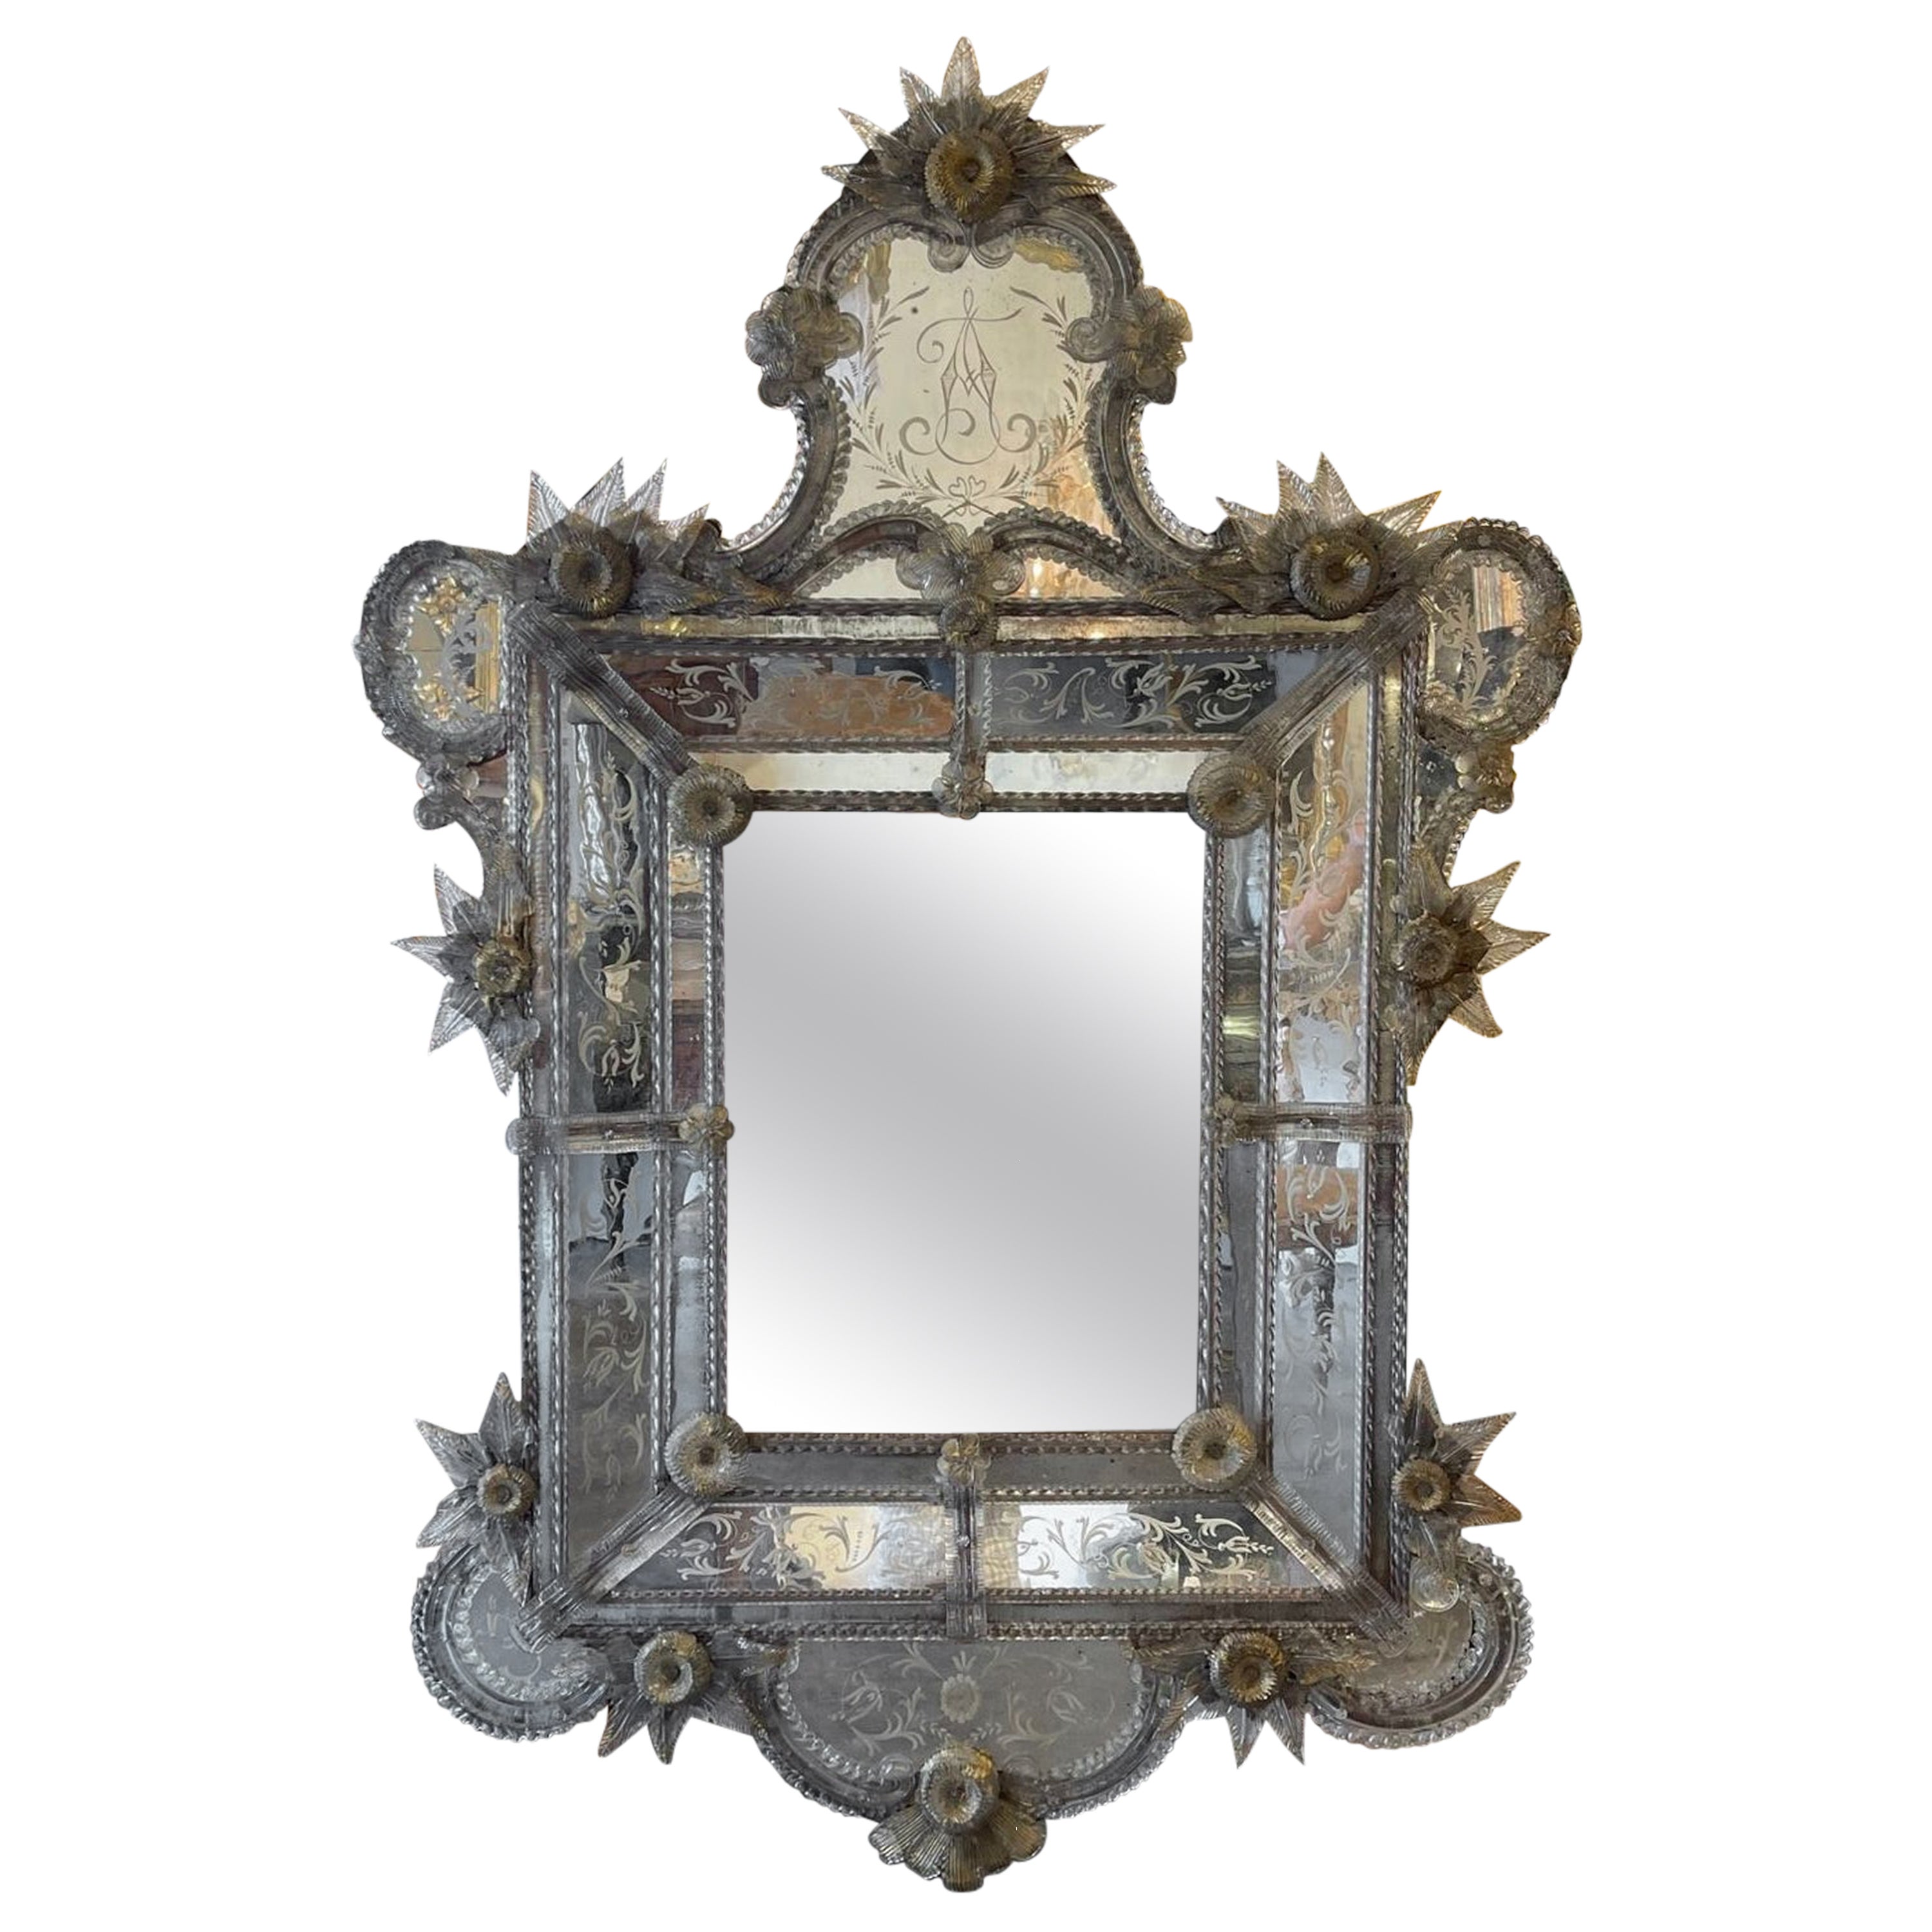 19th Century Venetian Etched Glass Mirror with Leaves and Flowers